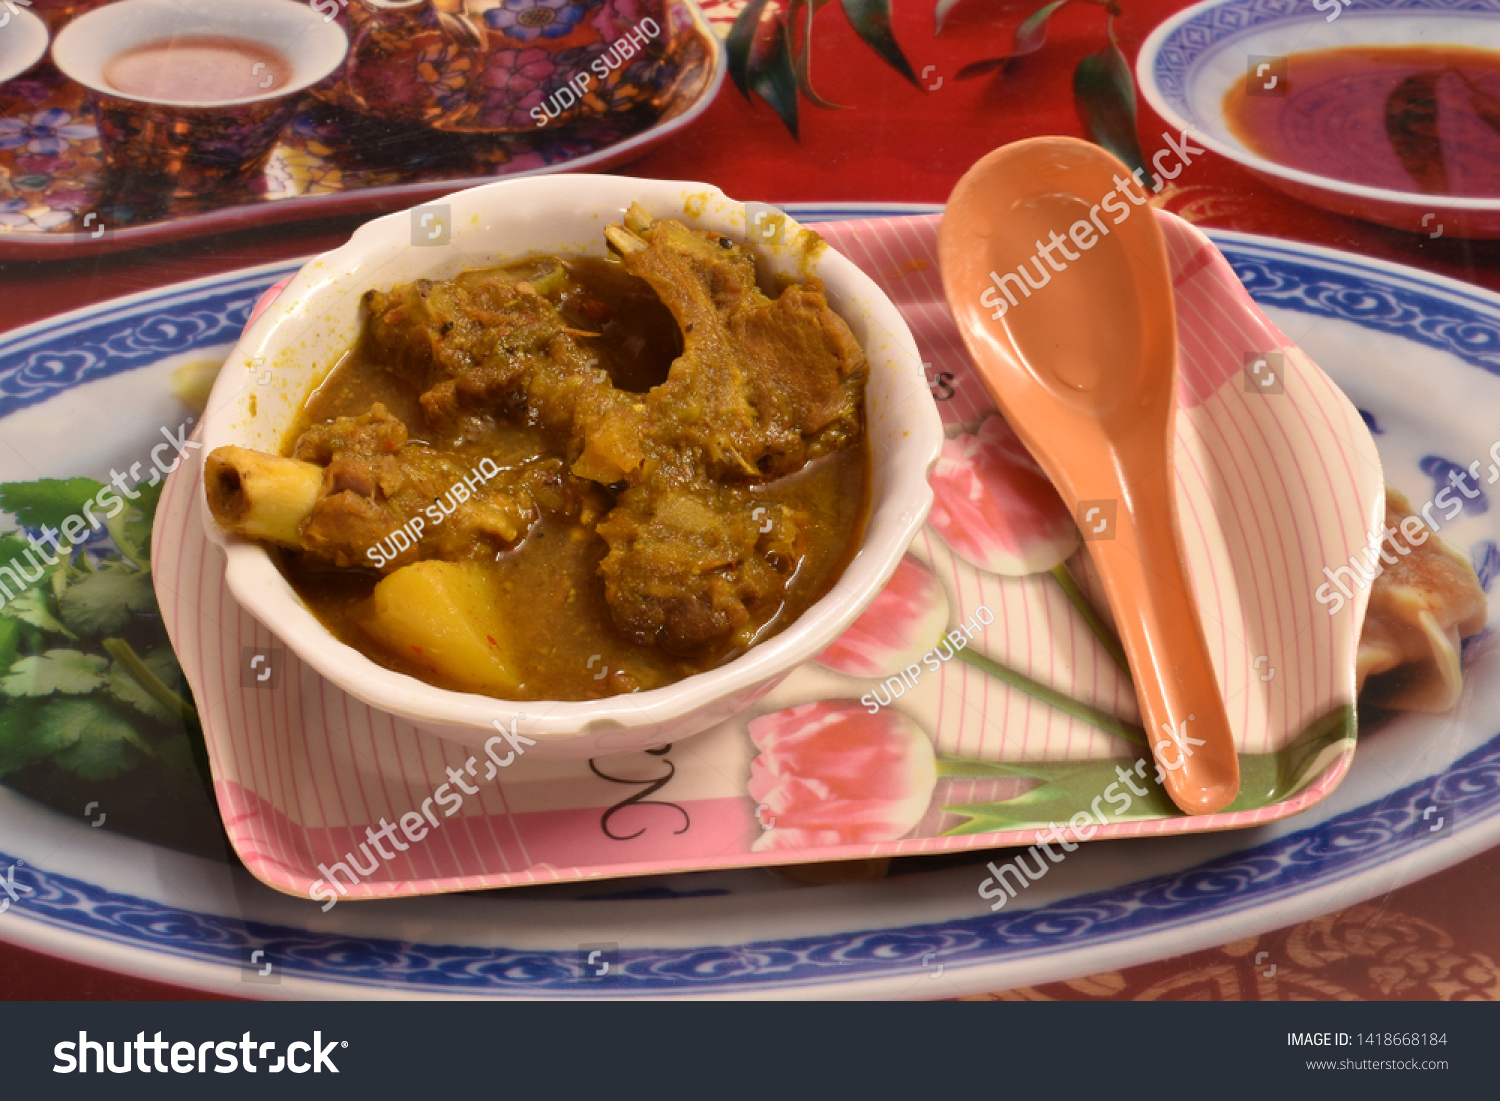 Mutton Curry Recipe Typical Bengal Bihar Food And Drink Stock Image 1418668184,Bloody Mary Mix